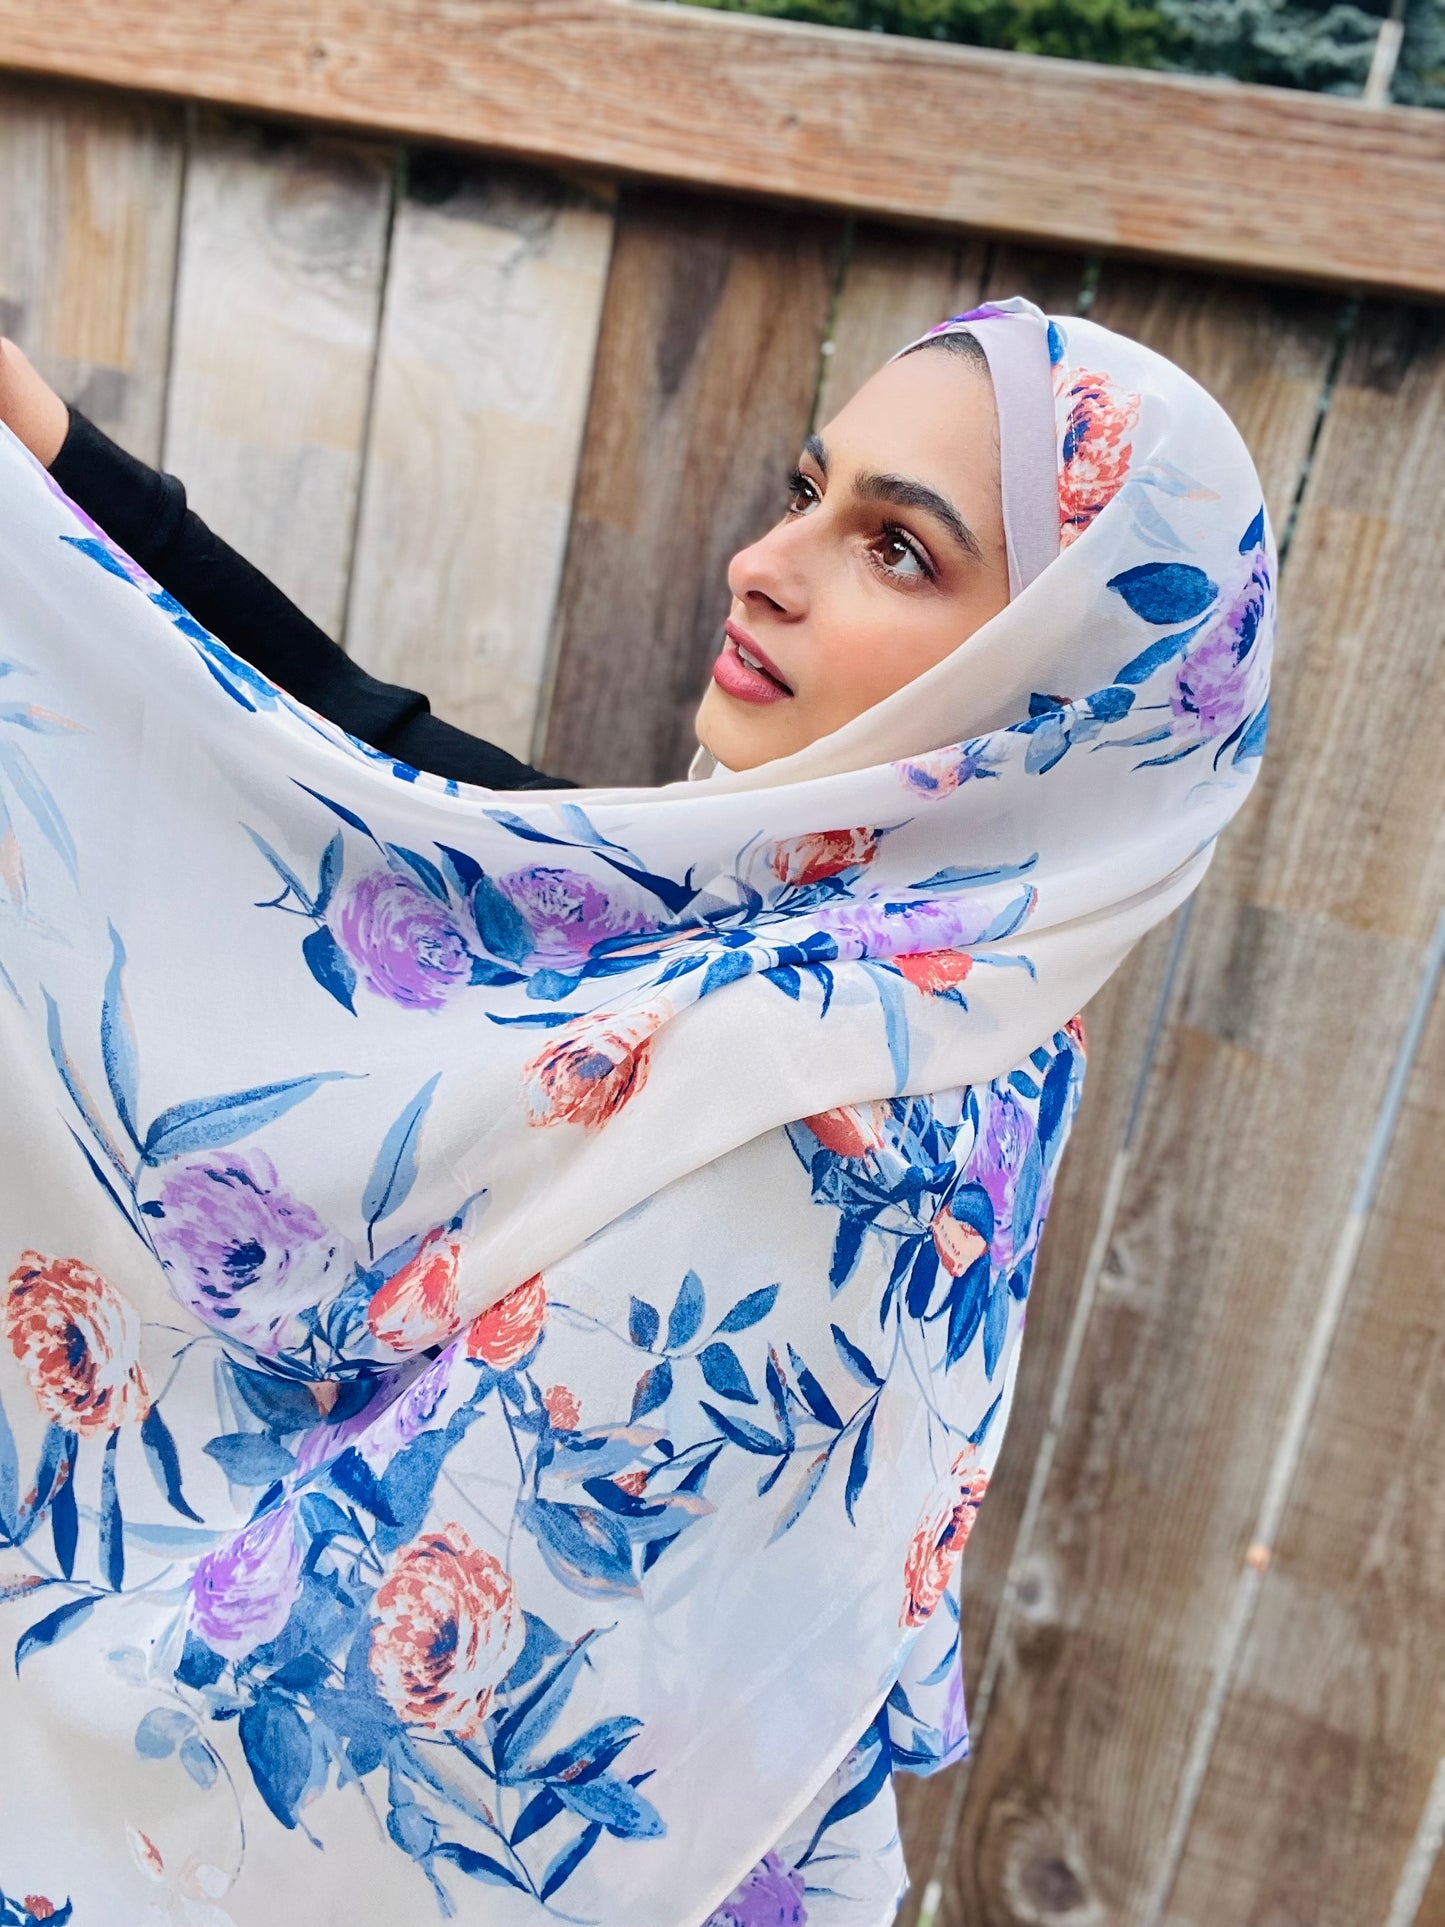 Limited Edition Crepe Chiffon Hijab: Homecoming Queen